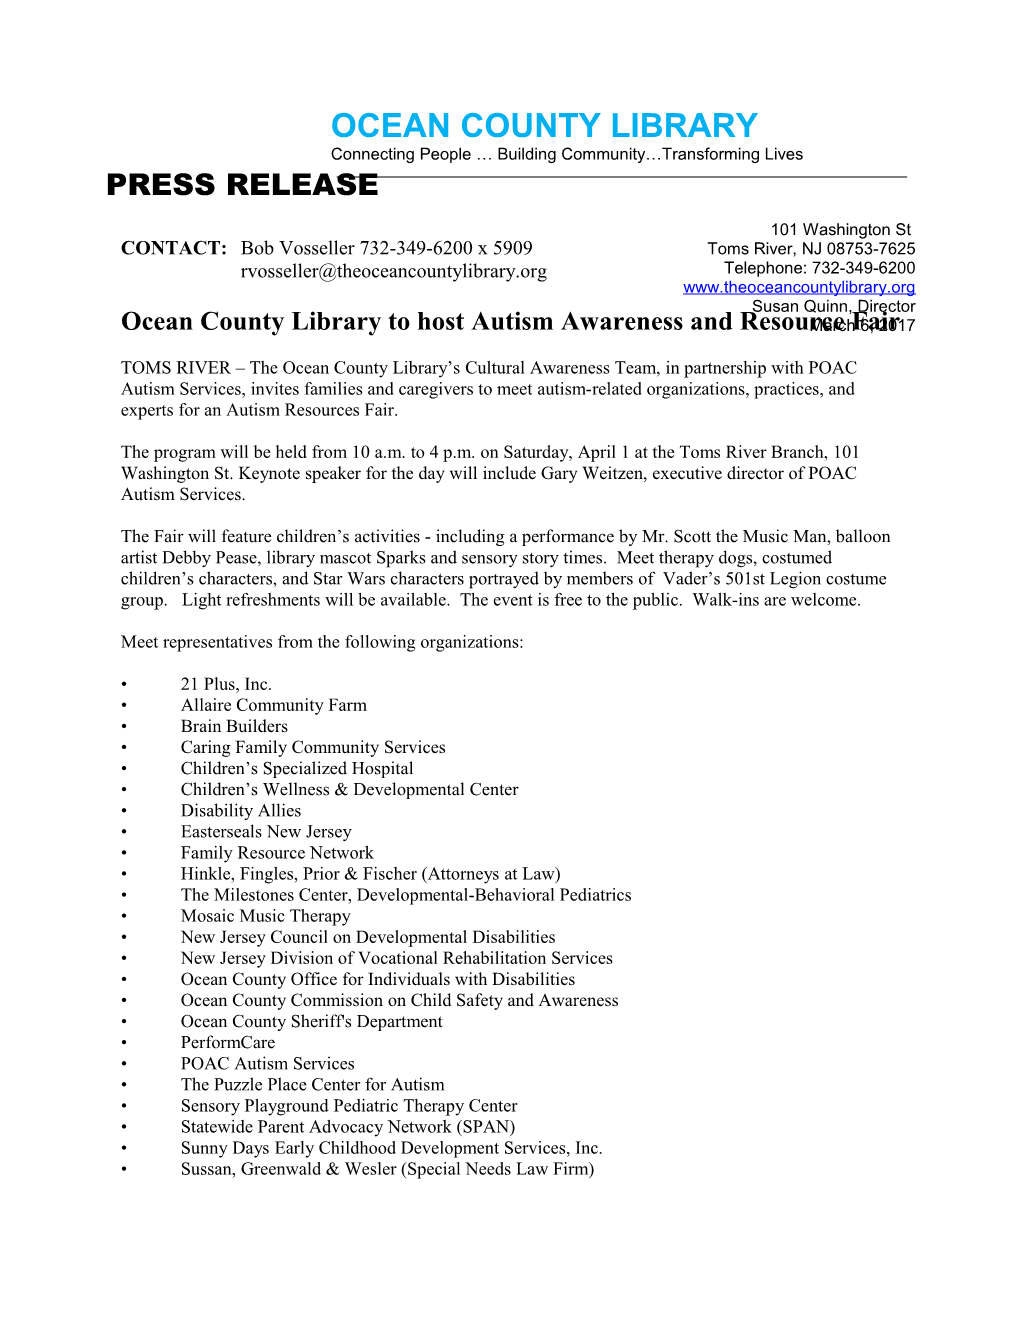 Ocean County Library to Host Autism Awareness and Resource Fair